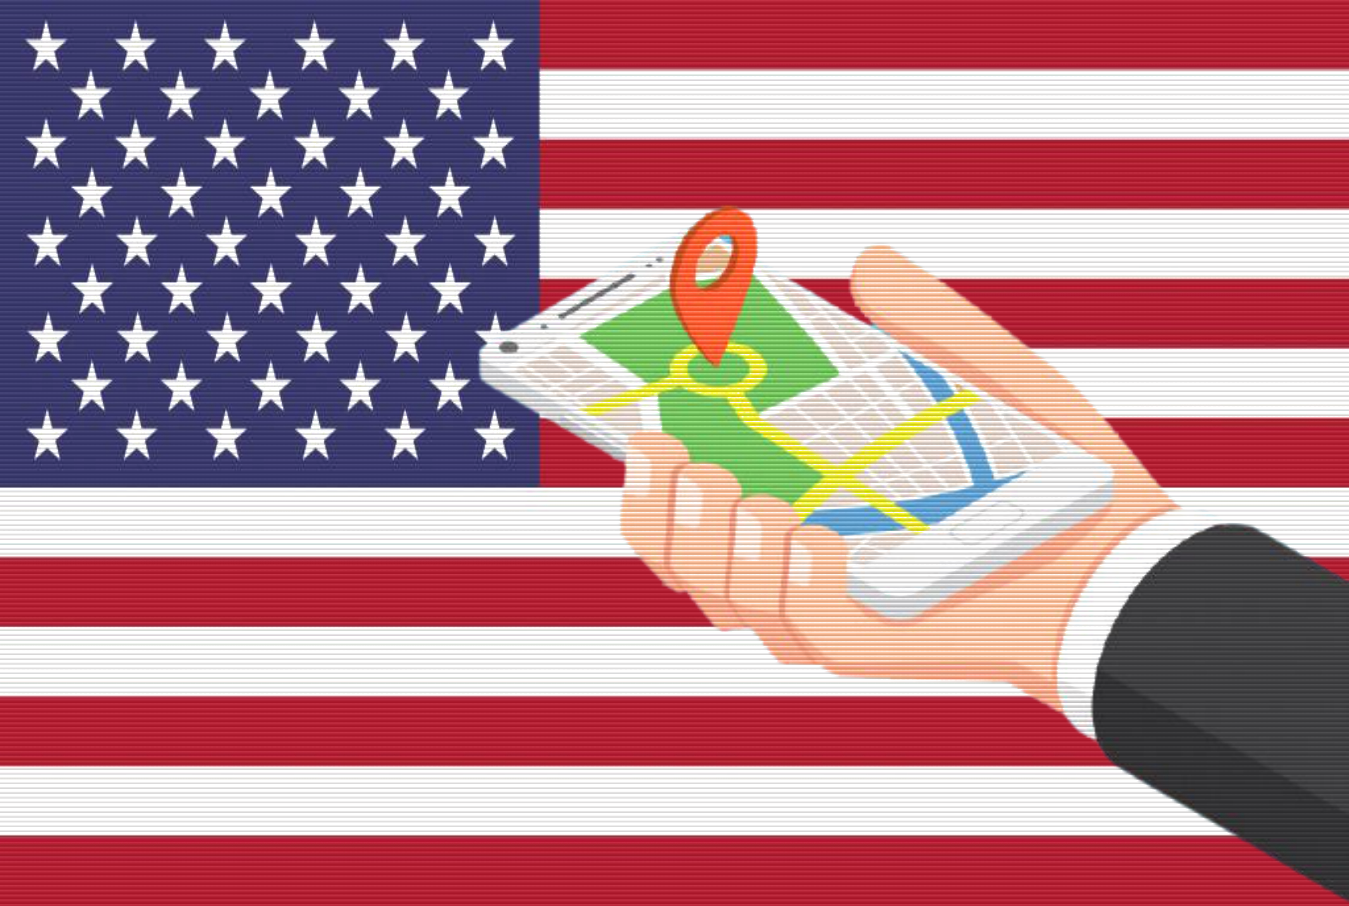 Generation Z least likely to share their location data with government